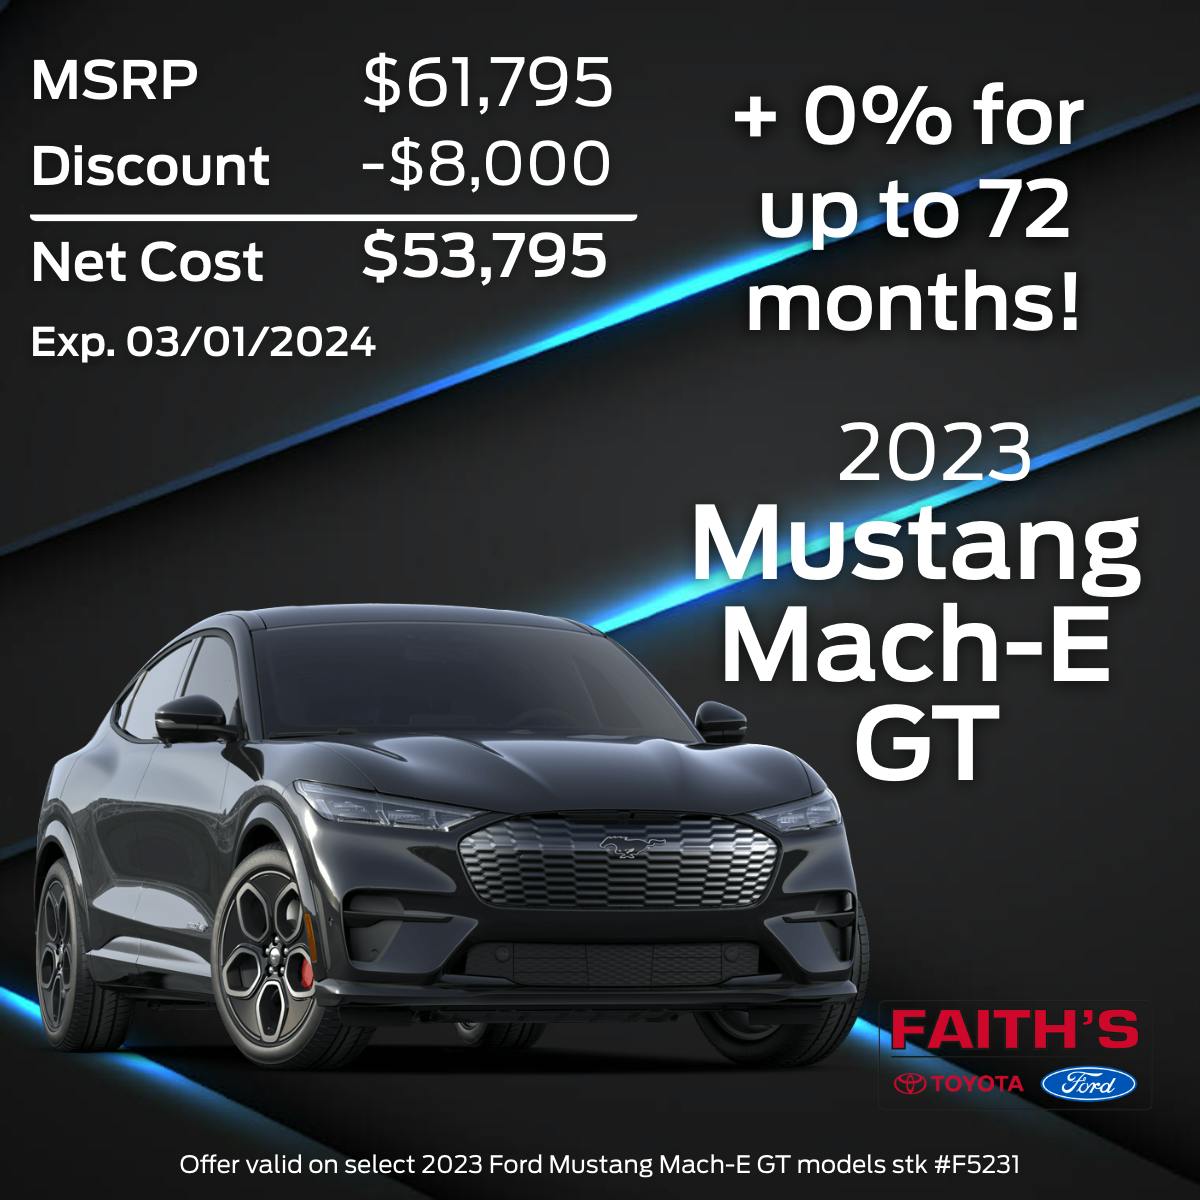 2023 Ford Mustang Mach-E Purchase Offer | Faiths Ford